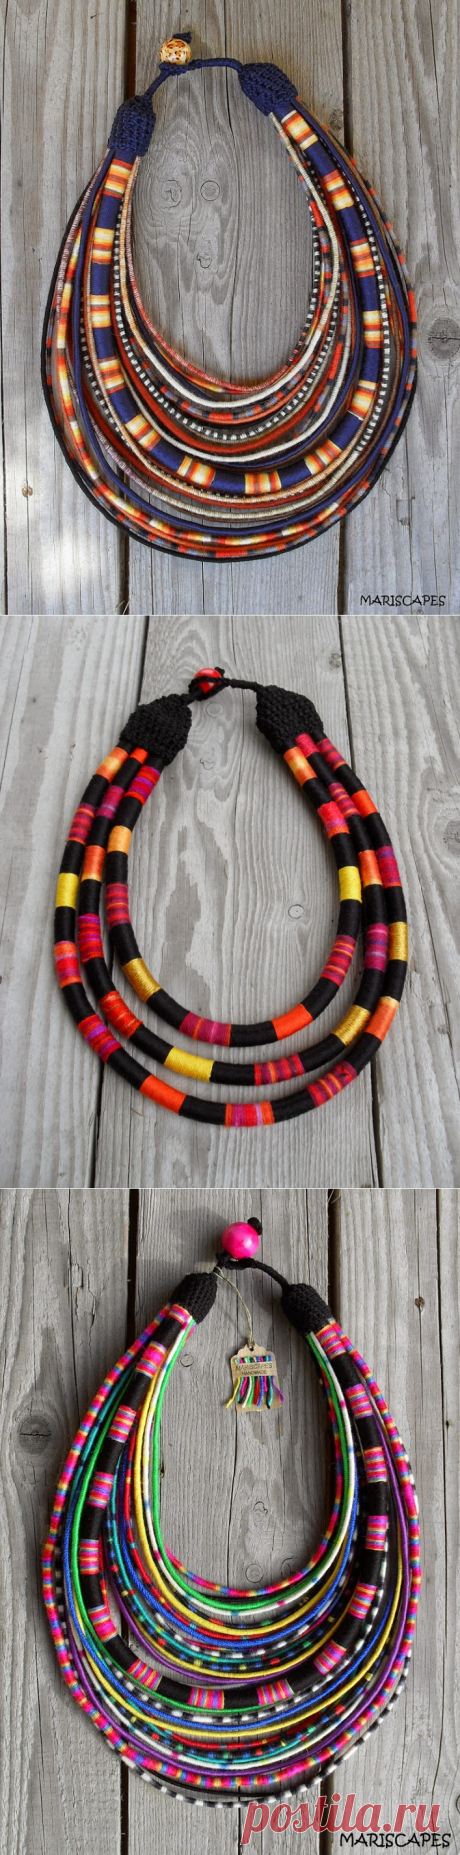 APIF Gift Guide: Necklaces by Mariscapes | African Prints in Fashion